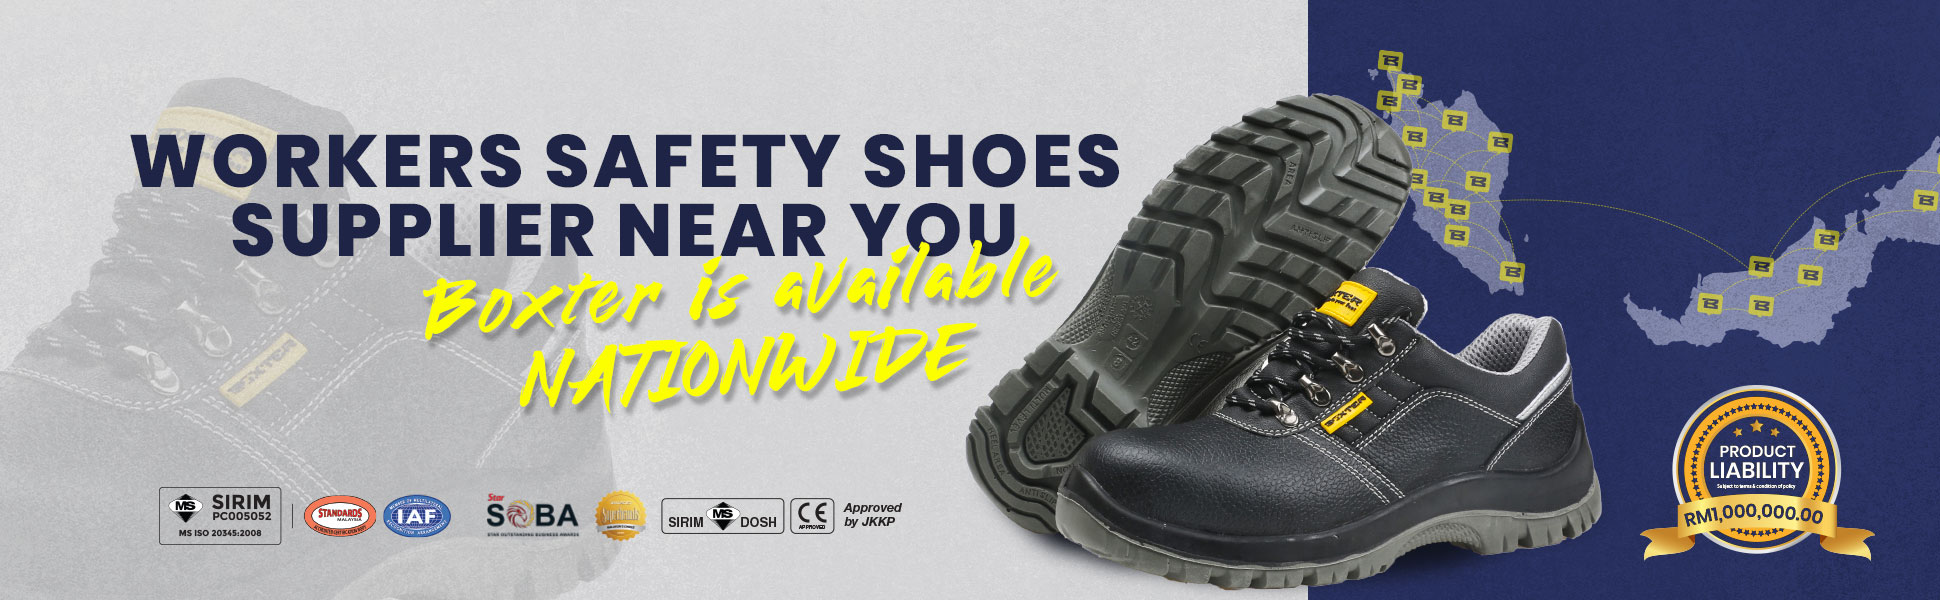 Safety Shoes Supplier Near You